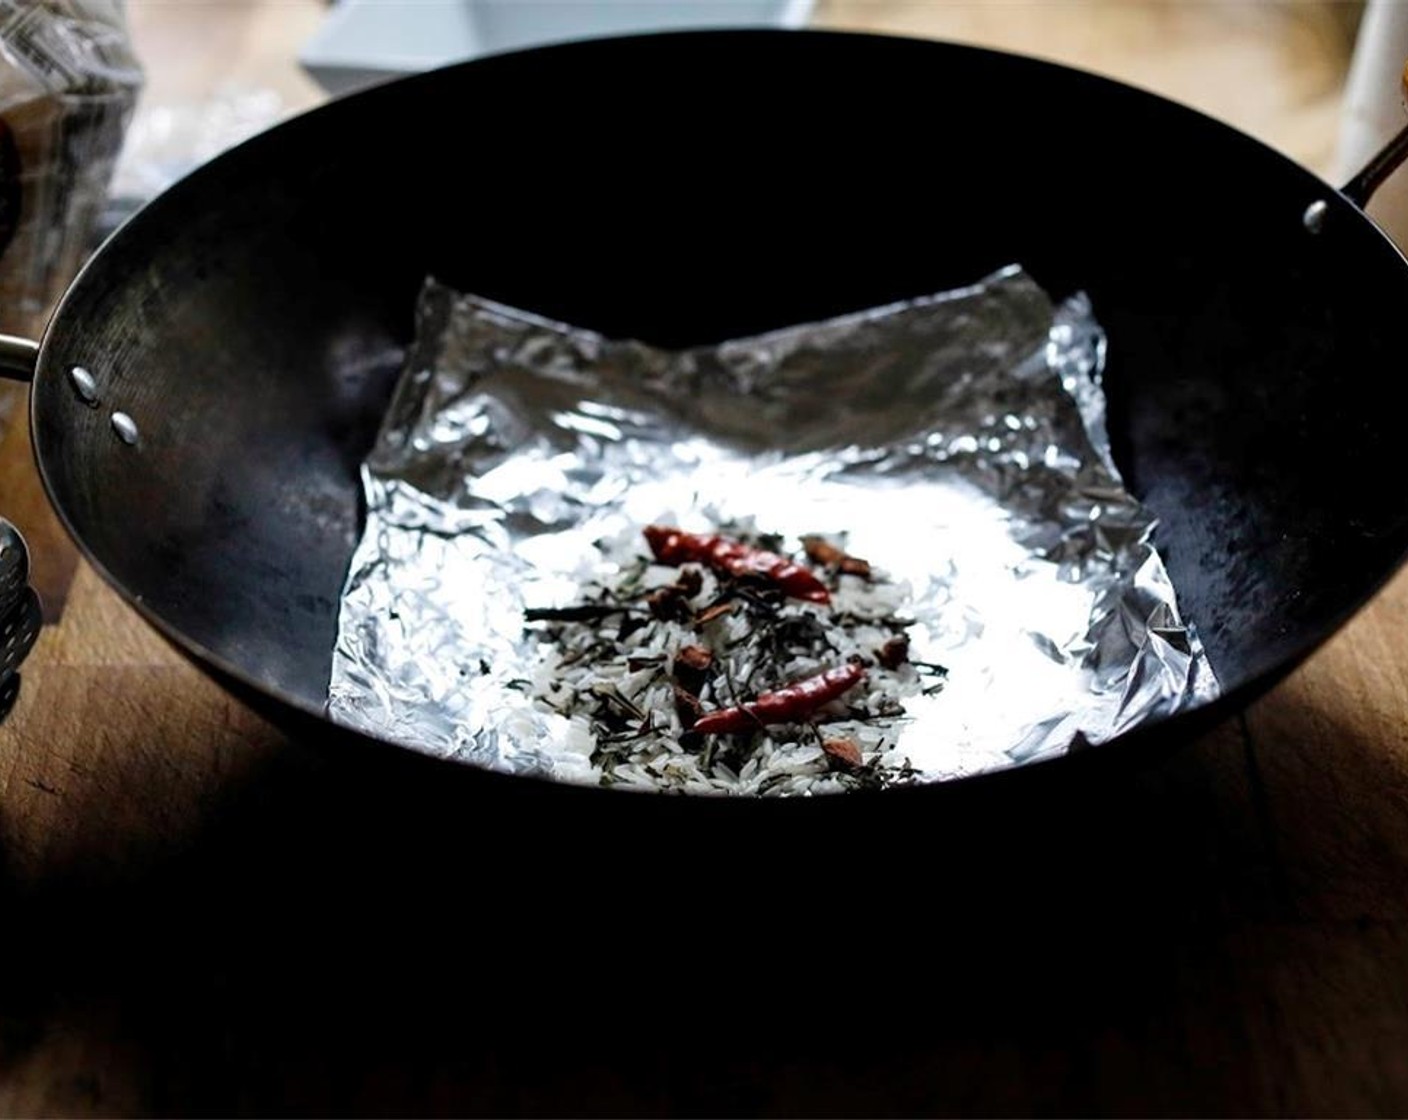 step 9 In a small bowl, mix the White Rice (3 Tbsp), Green Tea Leaves (2 Tbsp), Granulated Sugar (2 Tbsp), Star Anise (2), and Dried Chili Peppers (2). Place the smoking ingredients in the wok, spreading it out, to about 4 inches in diameter.